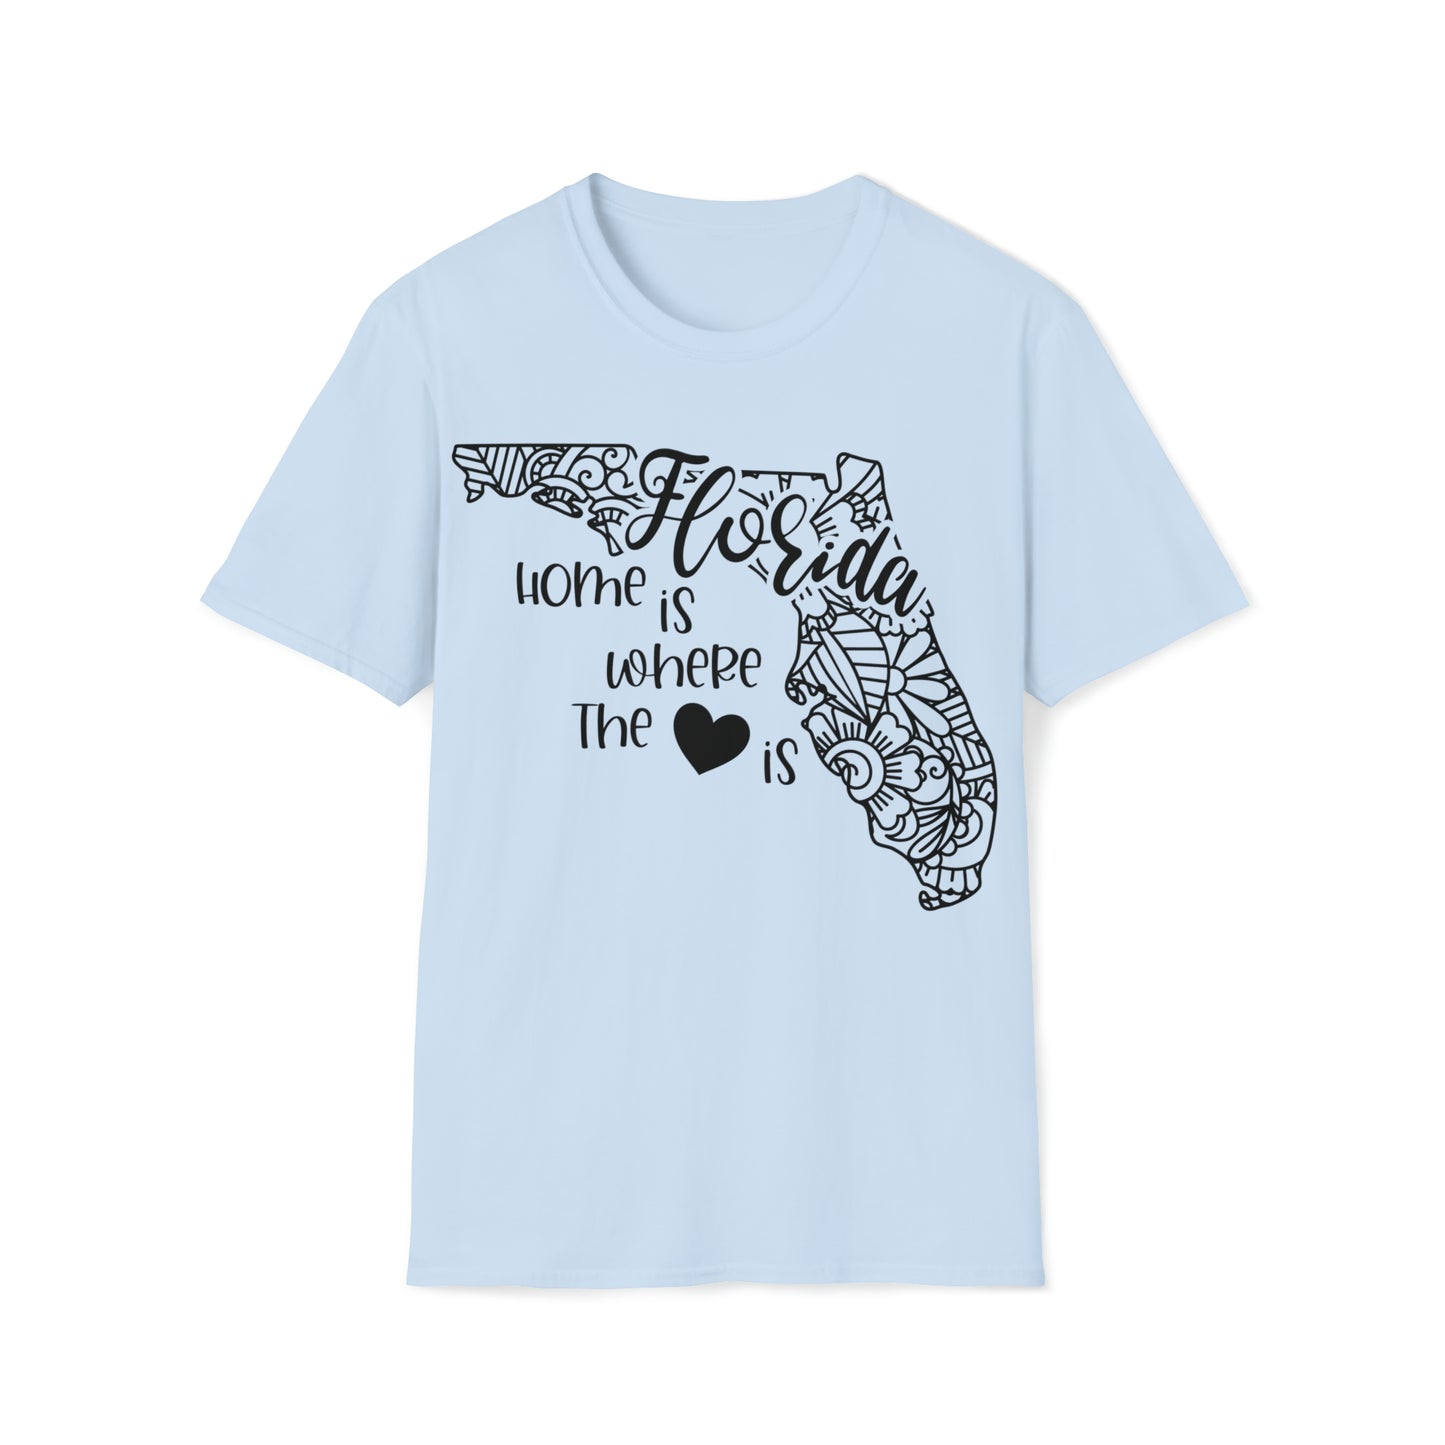 Florida is Where the Heart is T-Shirt